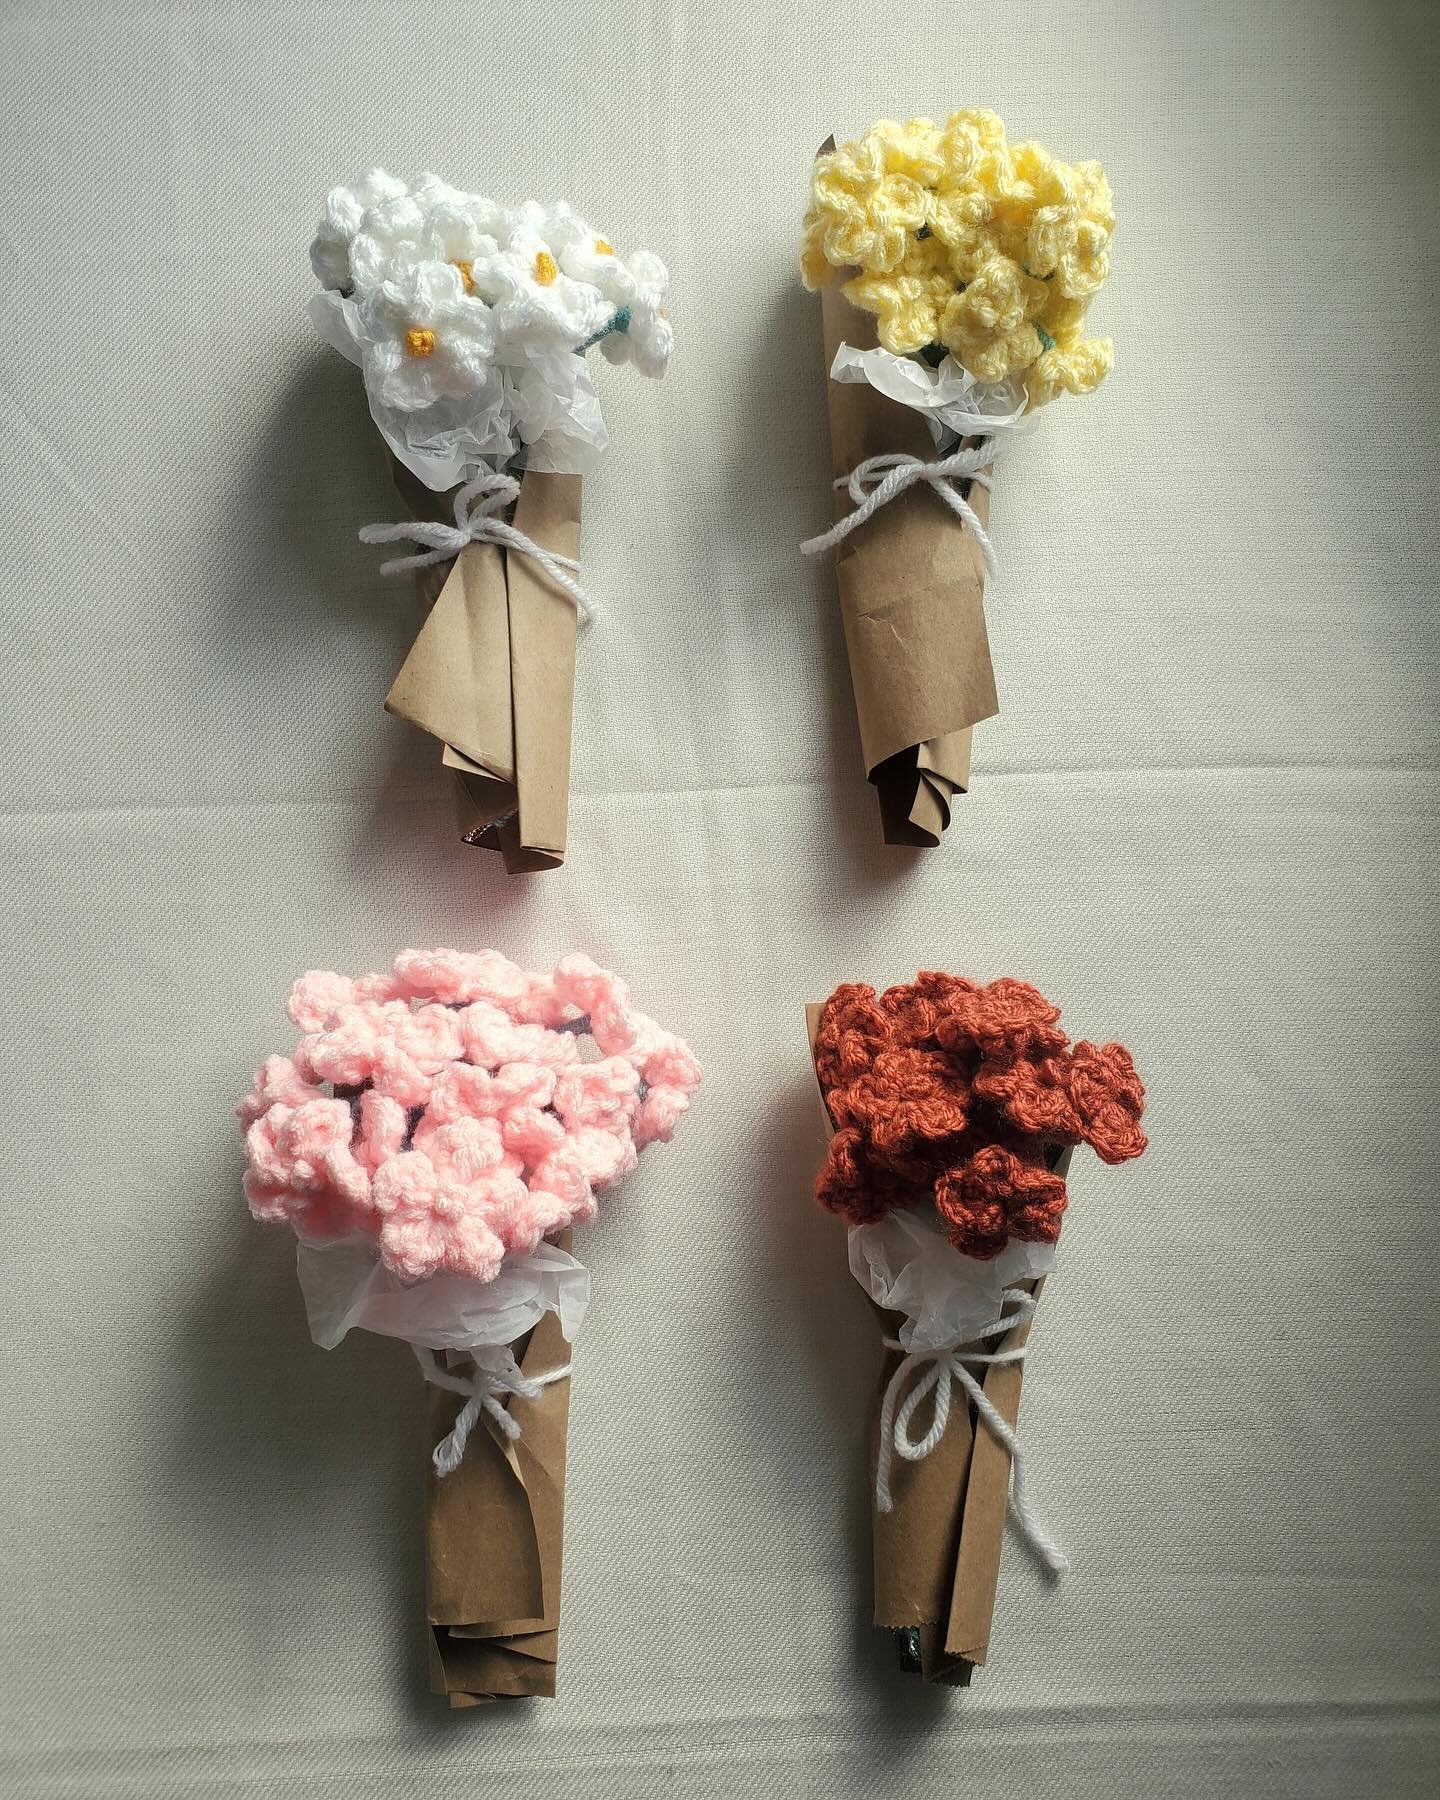 Check out these crochet bouquets from Aarya (@depari.art) at today&rsquo;s Art Market.
Prices range from $10-$12